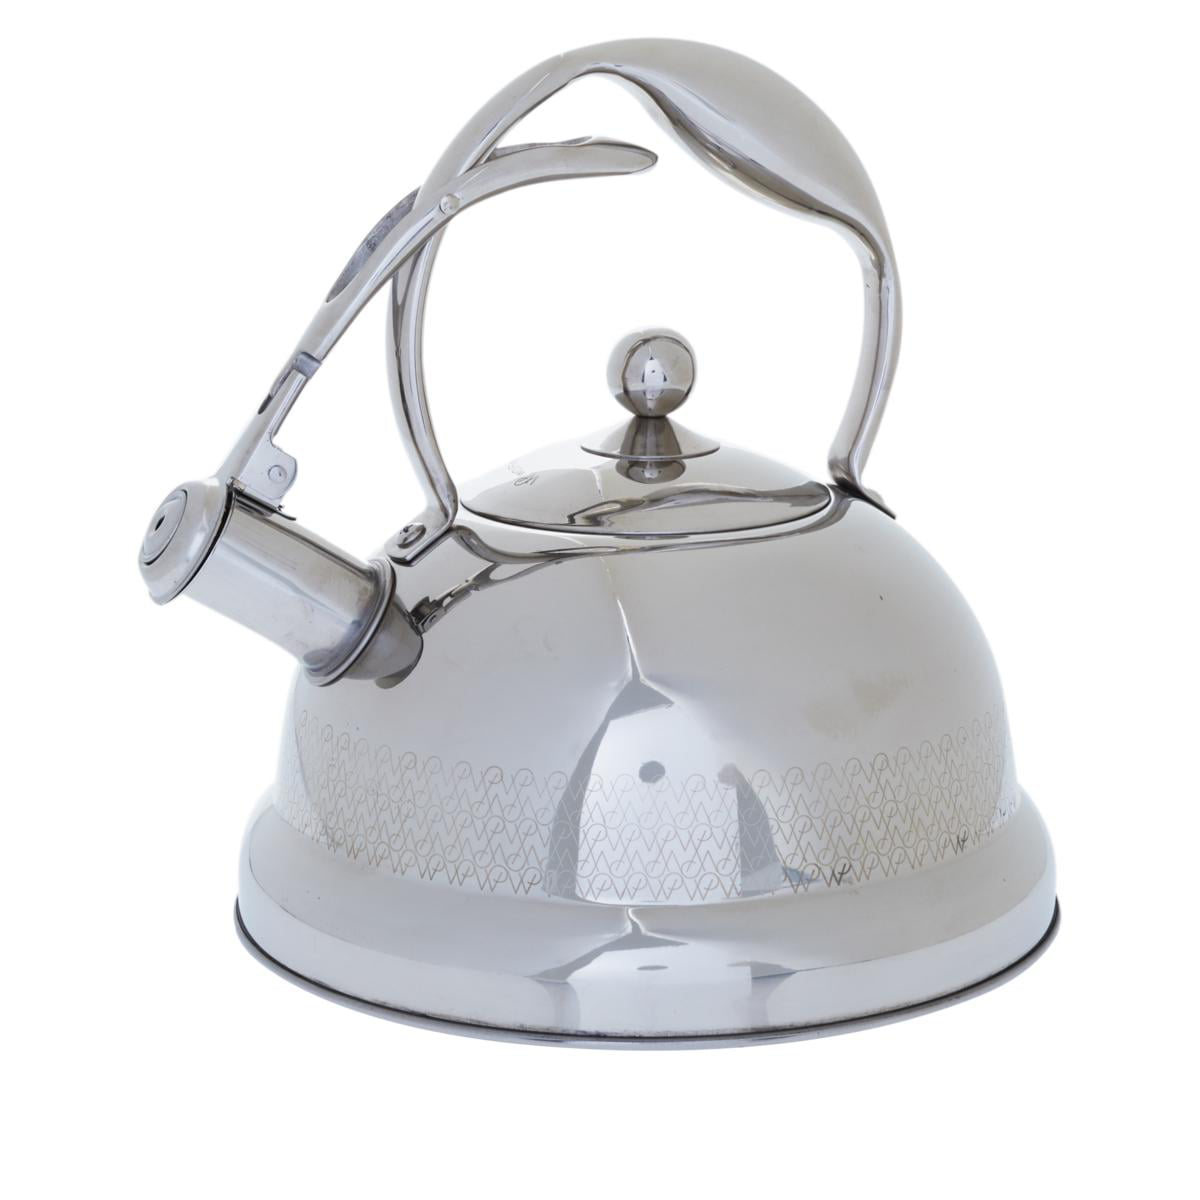 Wolfgang Puck Stainless Steel Petite Kettle and Tea Pot with Infuser -  9543200